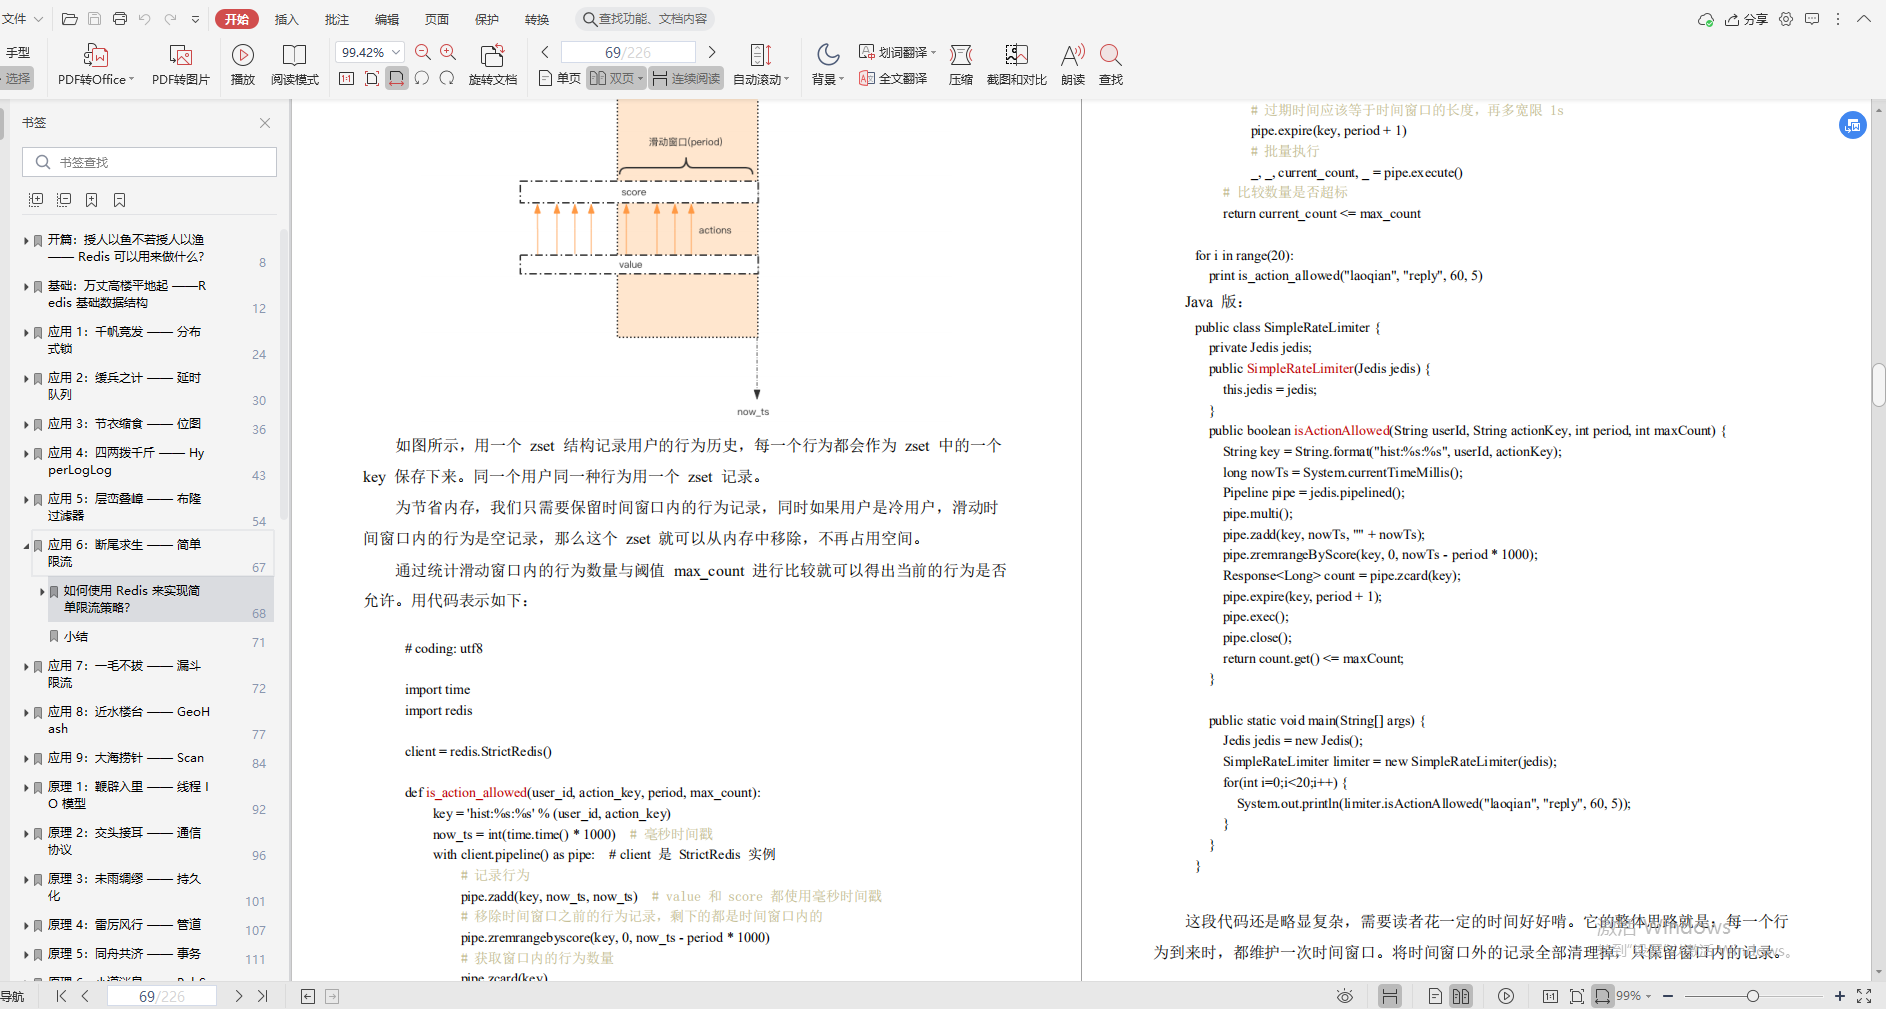 Tencent Cloud God’s code "redis depth notes", don’t say a word of nonsense, it’s all the essence